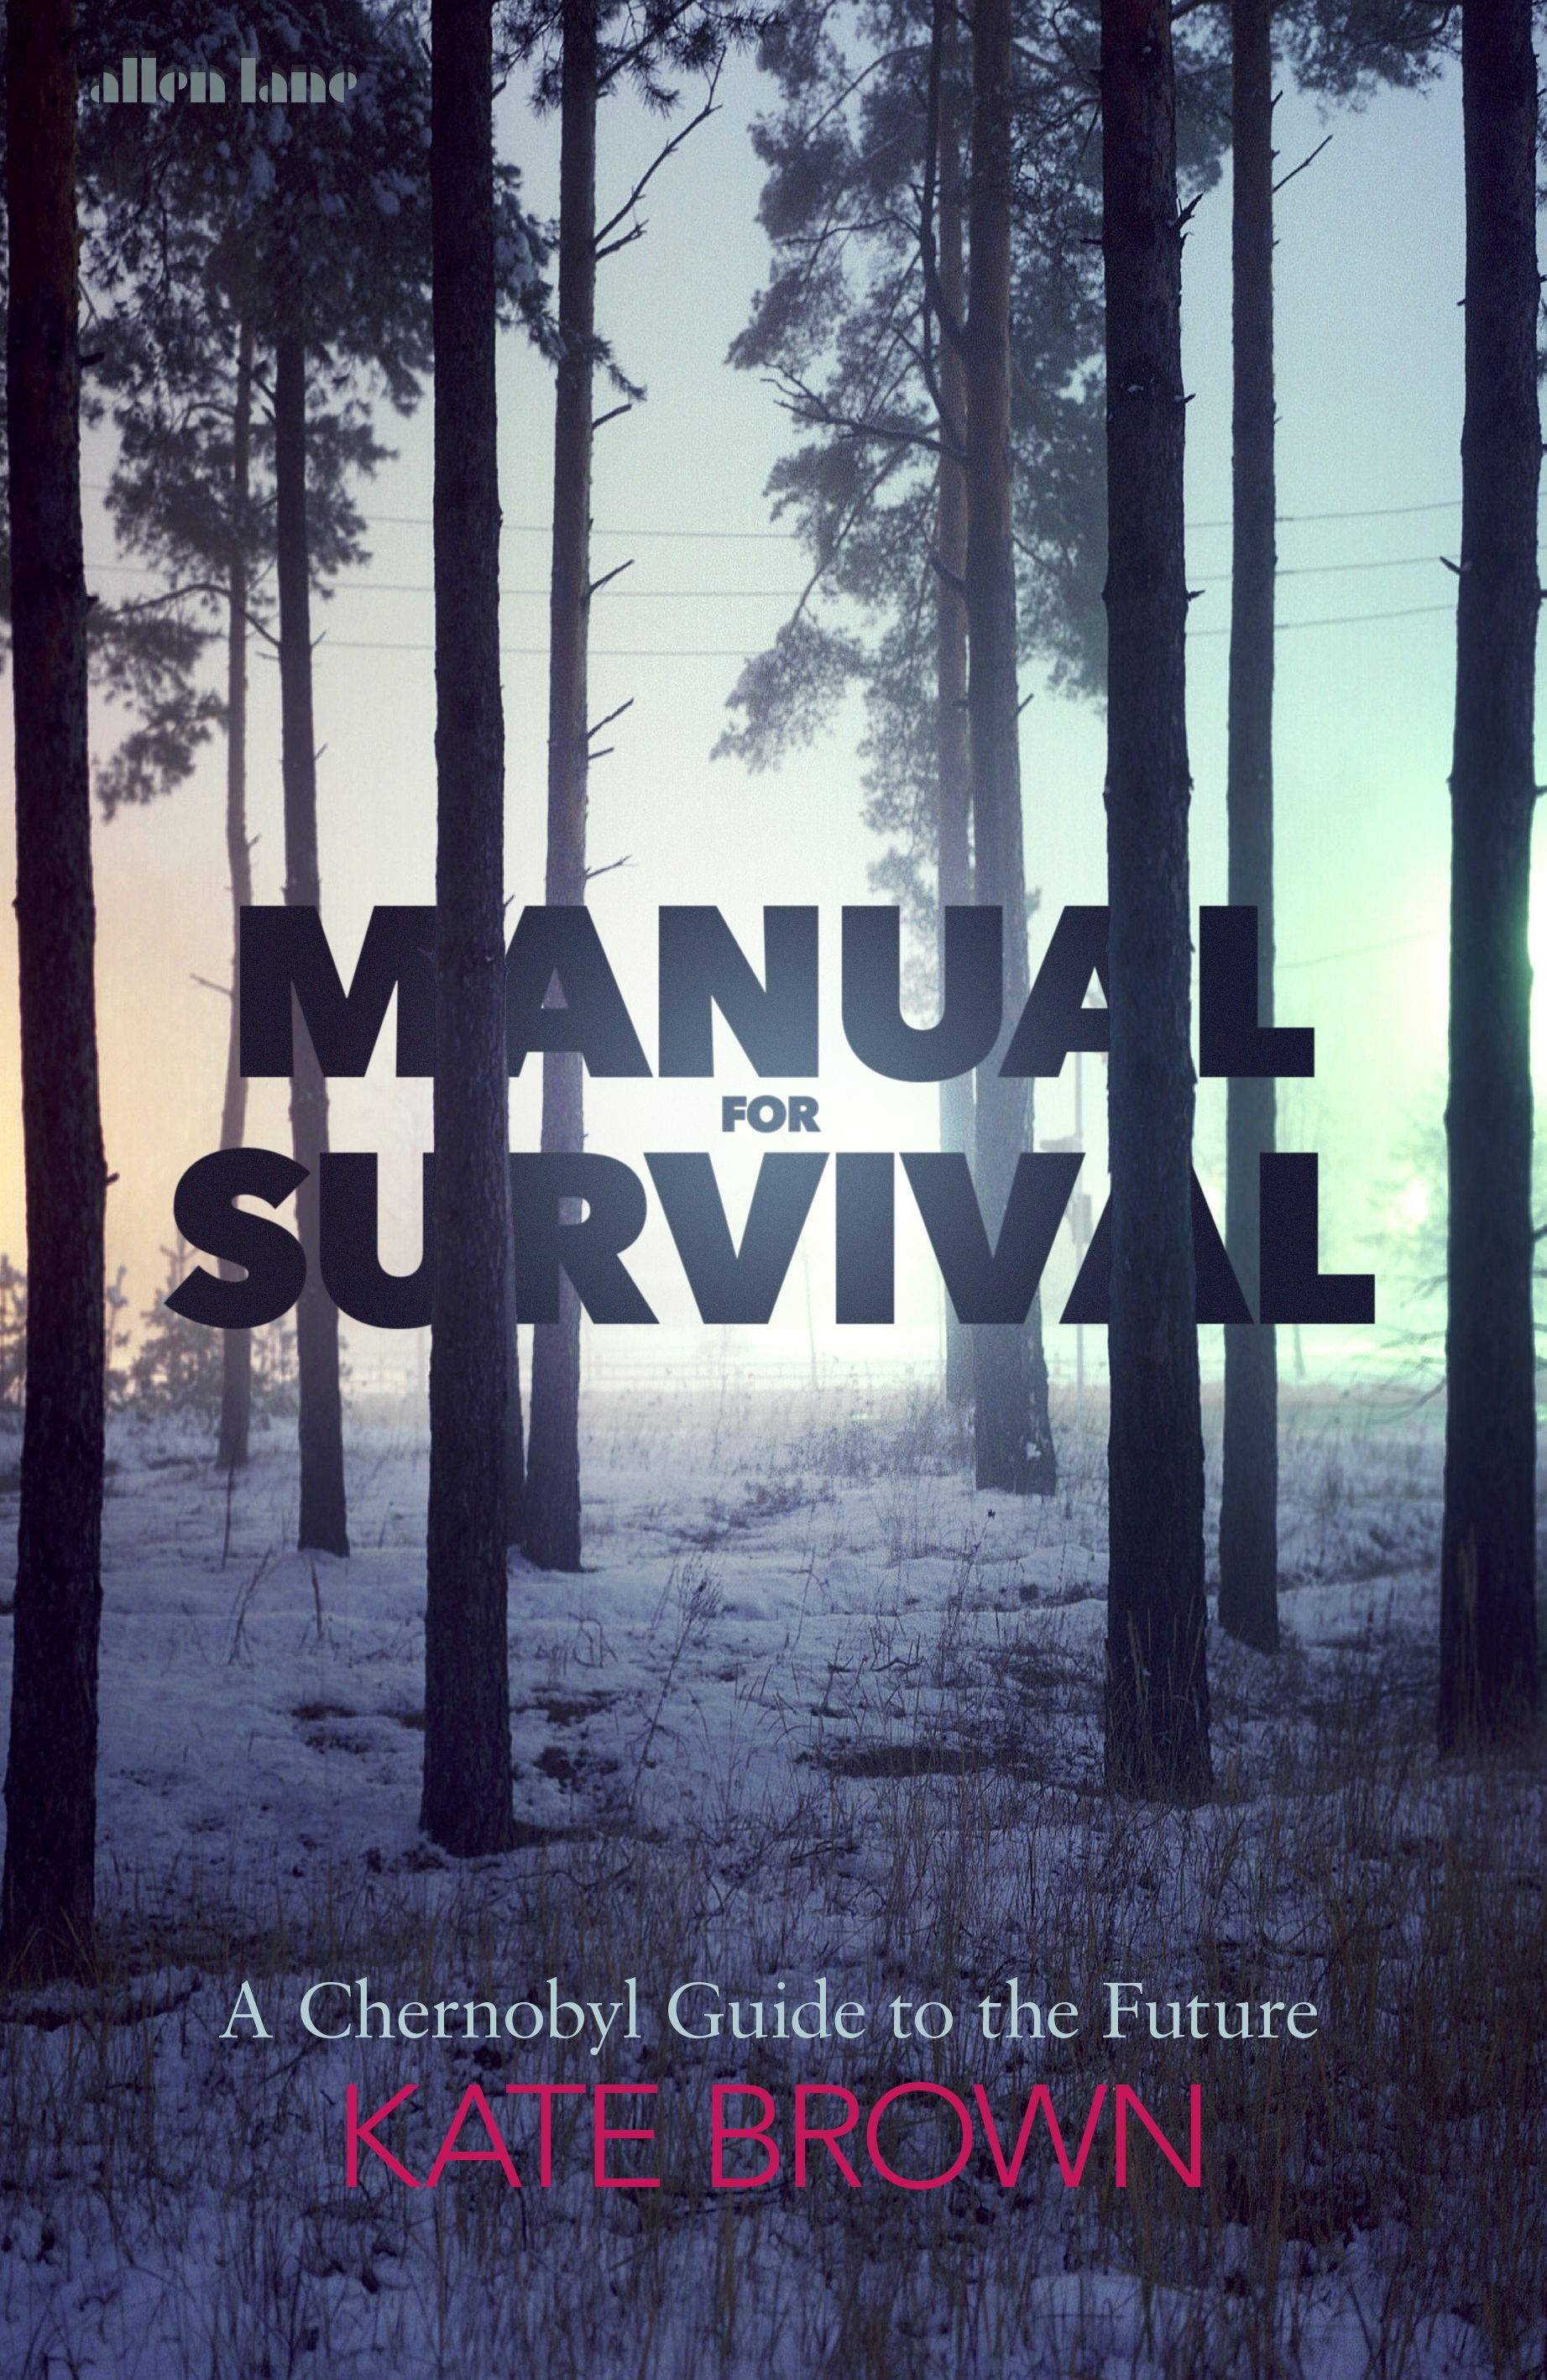 Kate Brown: Manual for survival